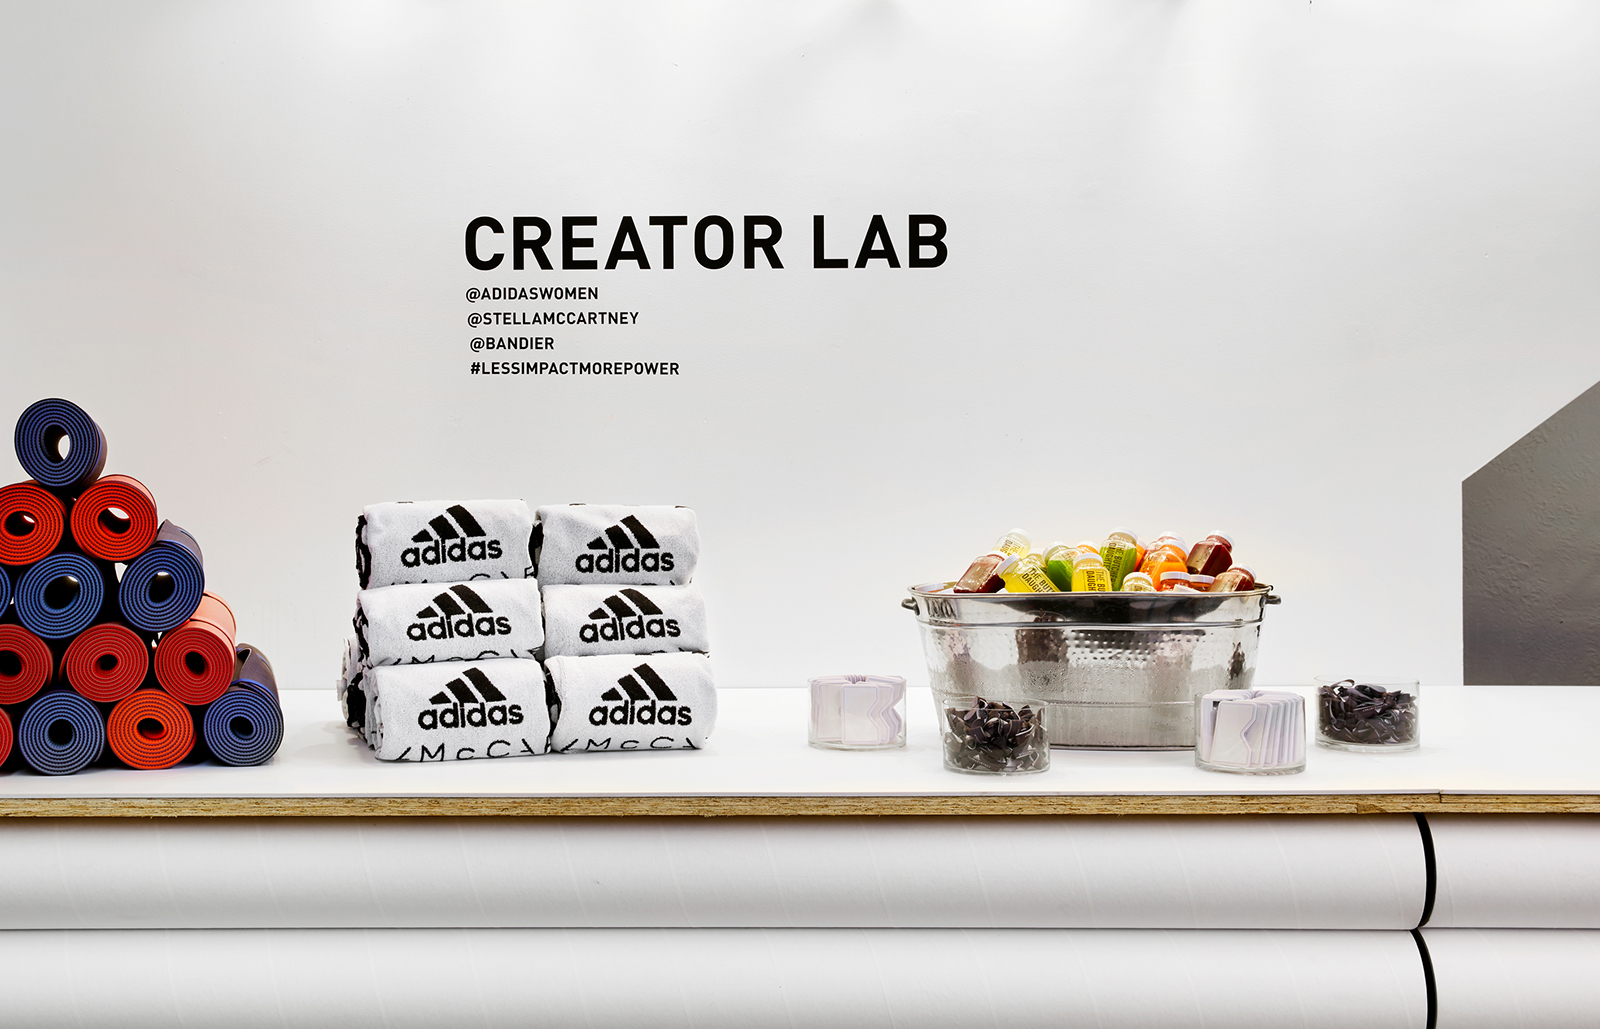 A stack of yoga mats, branded towels, and some snacks and juices sit on a white counter with Creator Lab written on the wall behind.